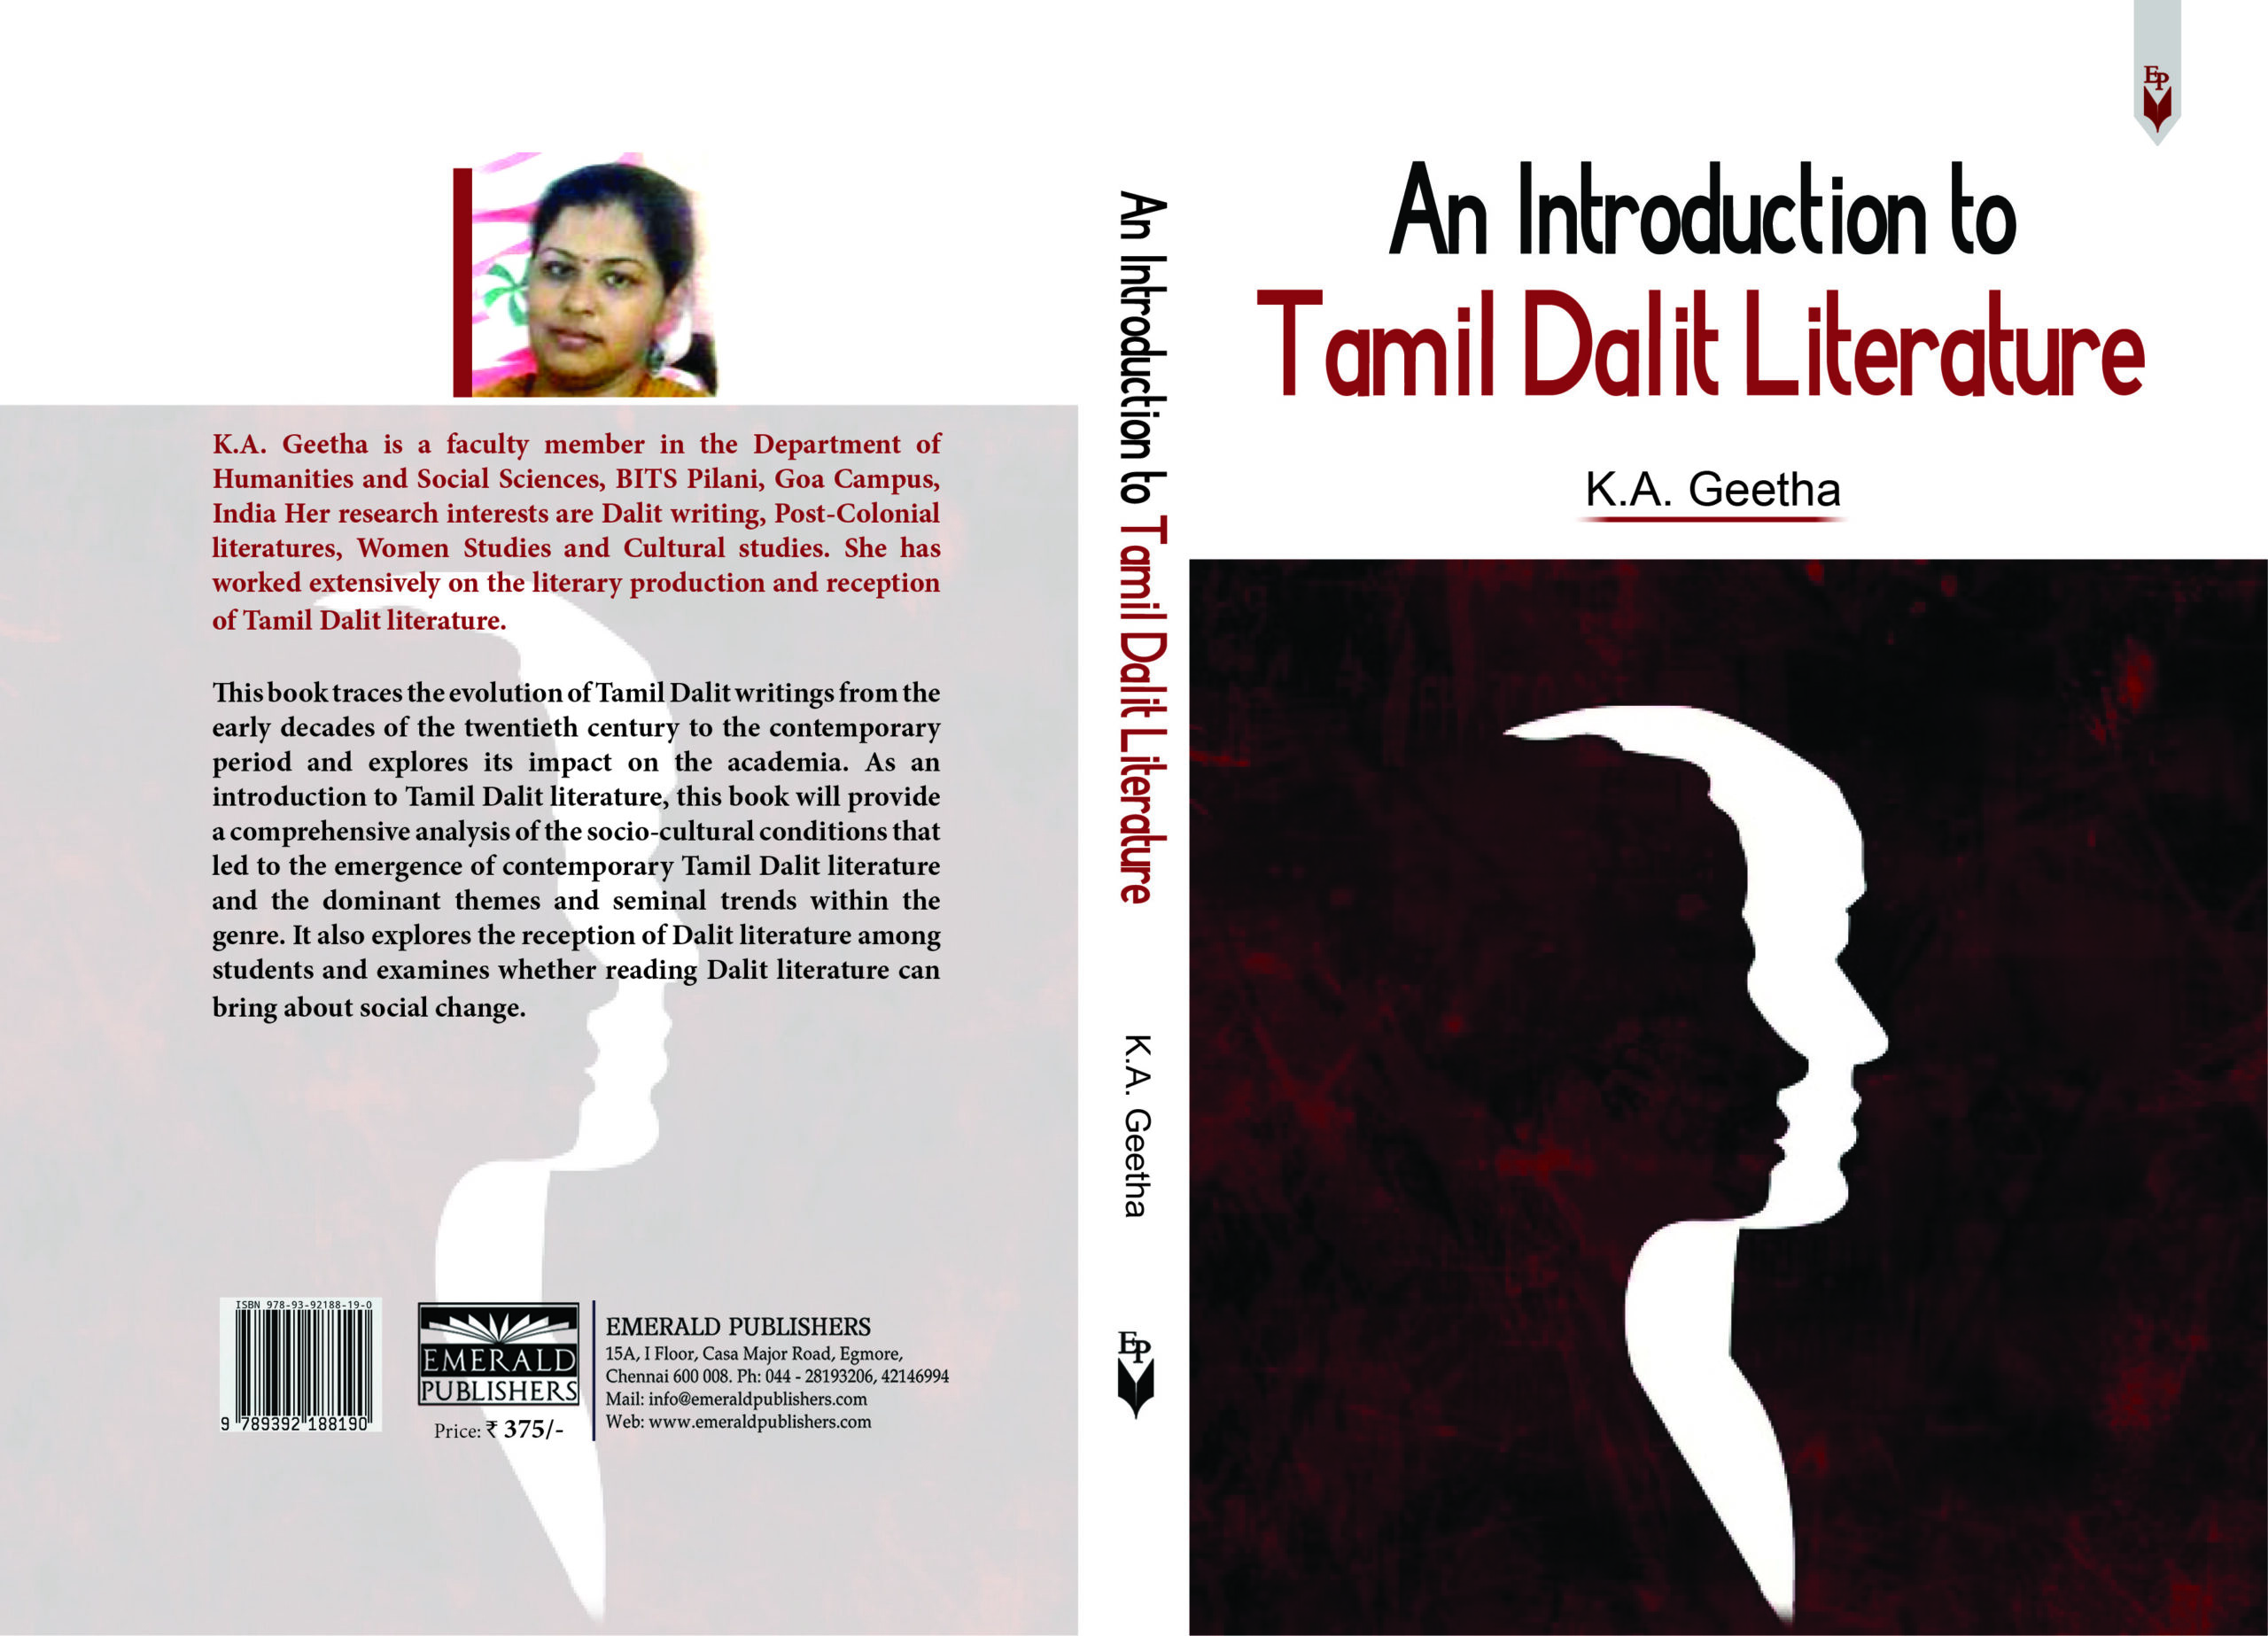 research paper on dalit literature